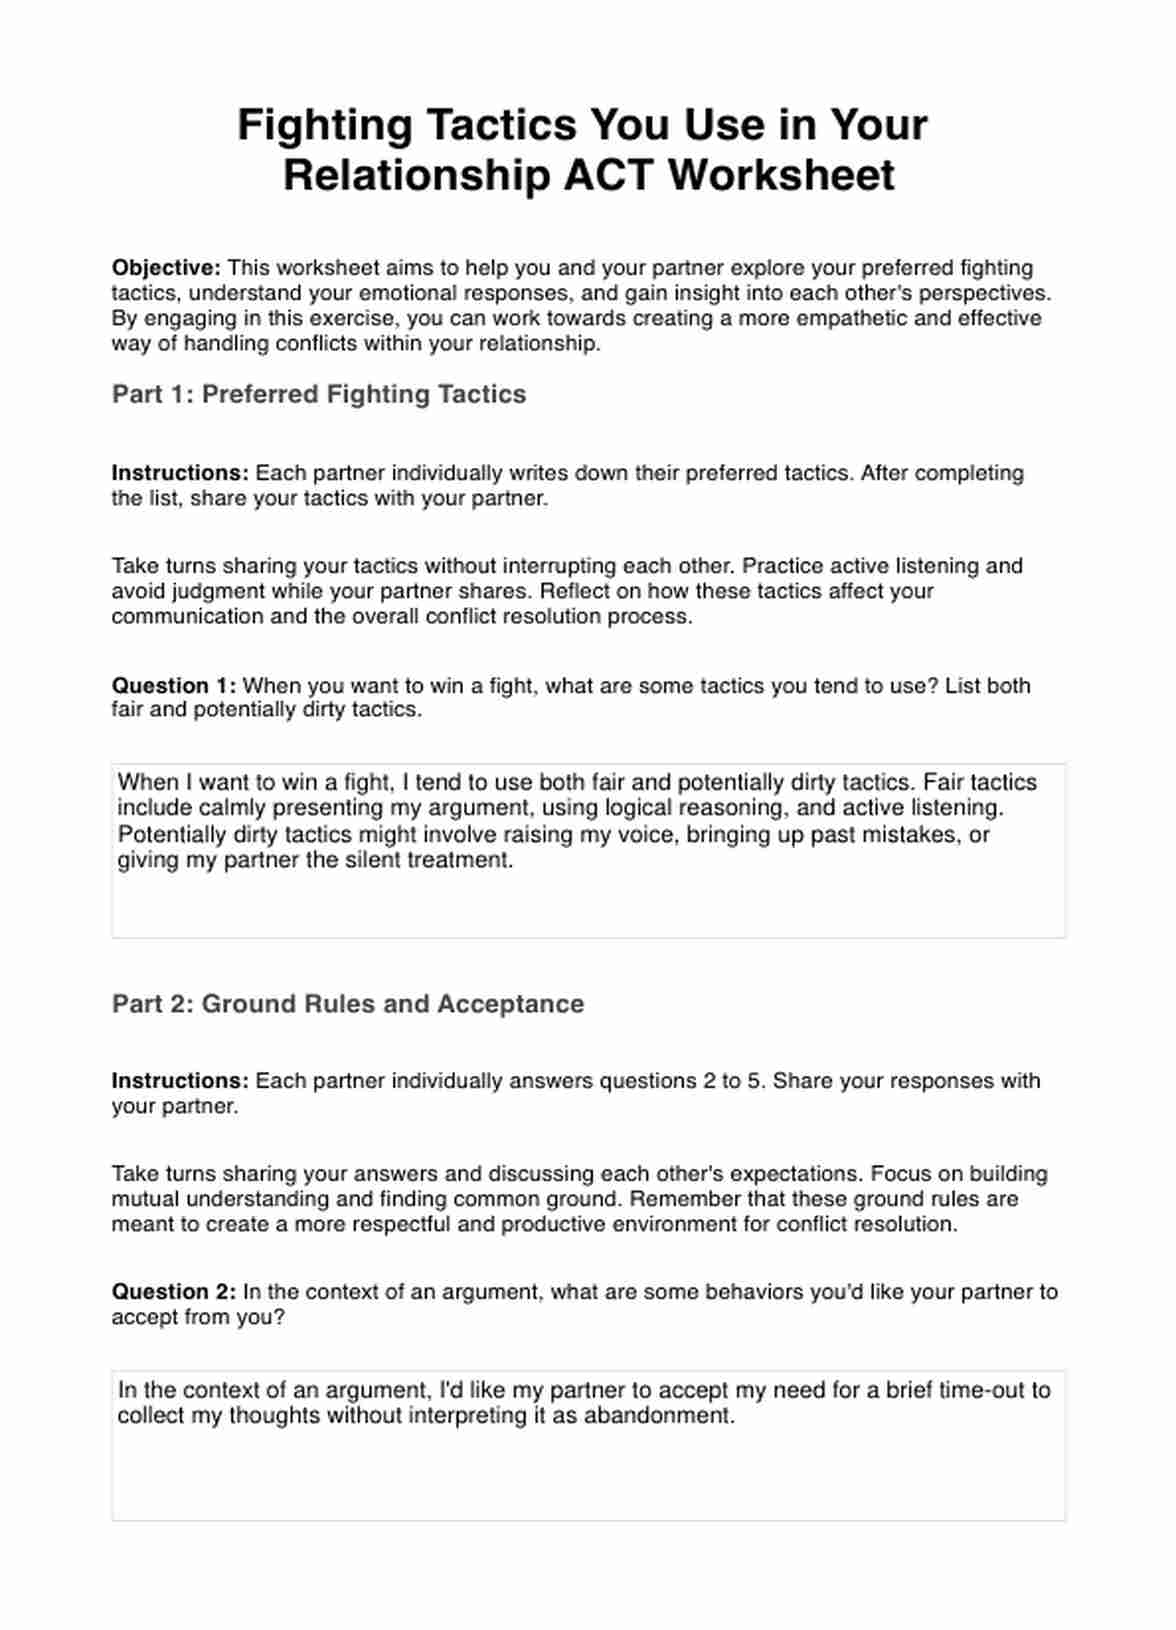 Fighting Tactics You Use in Your Relationship ACT Worksheet PDF Example